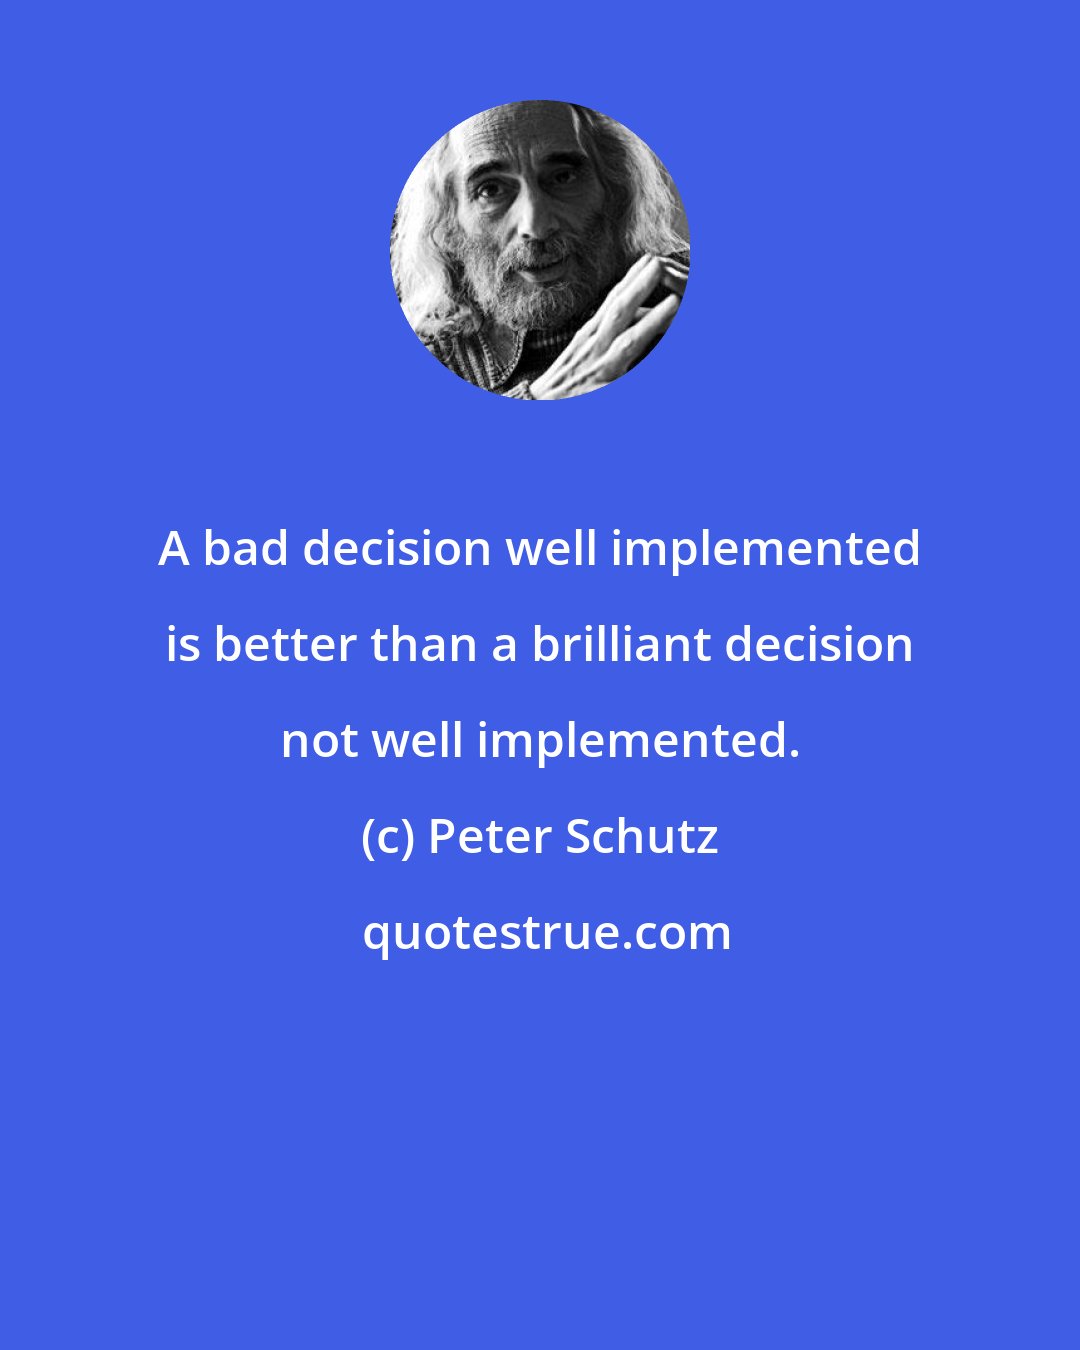 Peter Schutz: A bad decision well implemented is better than a brilliant decision not well implemented.